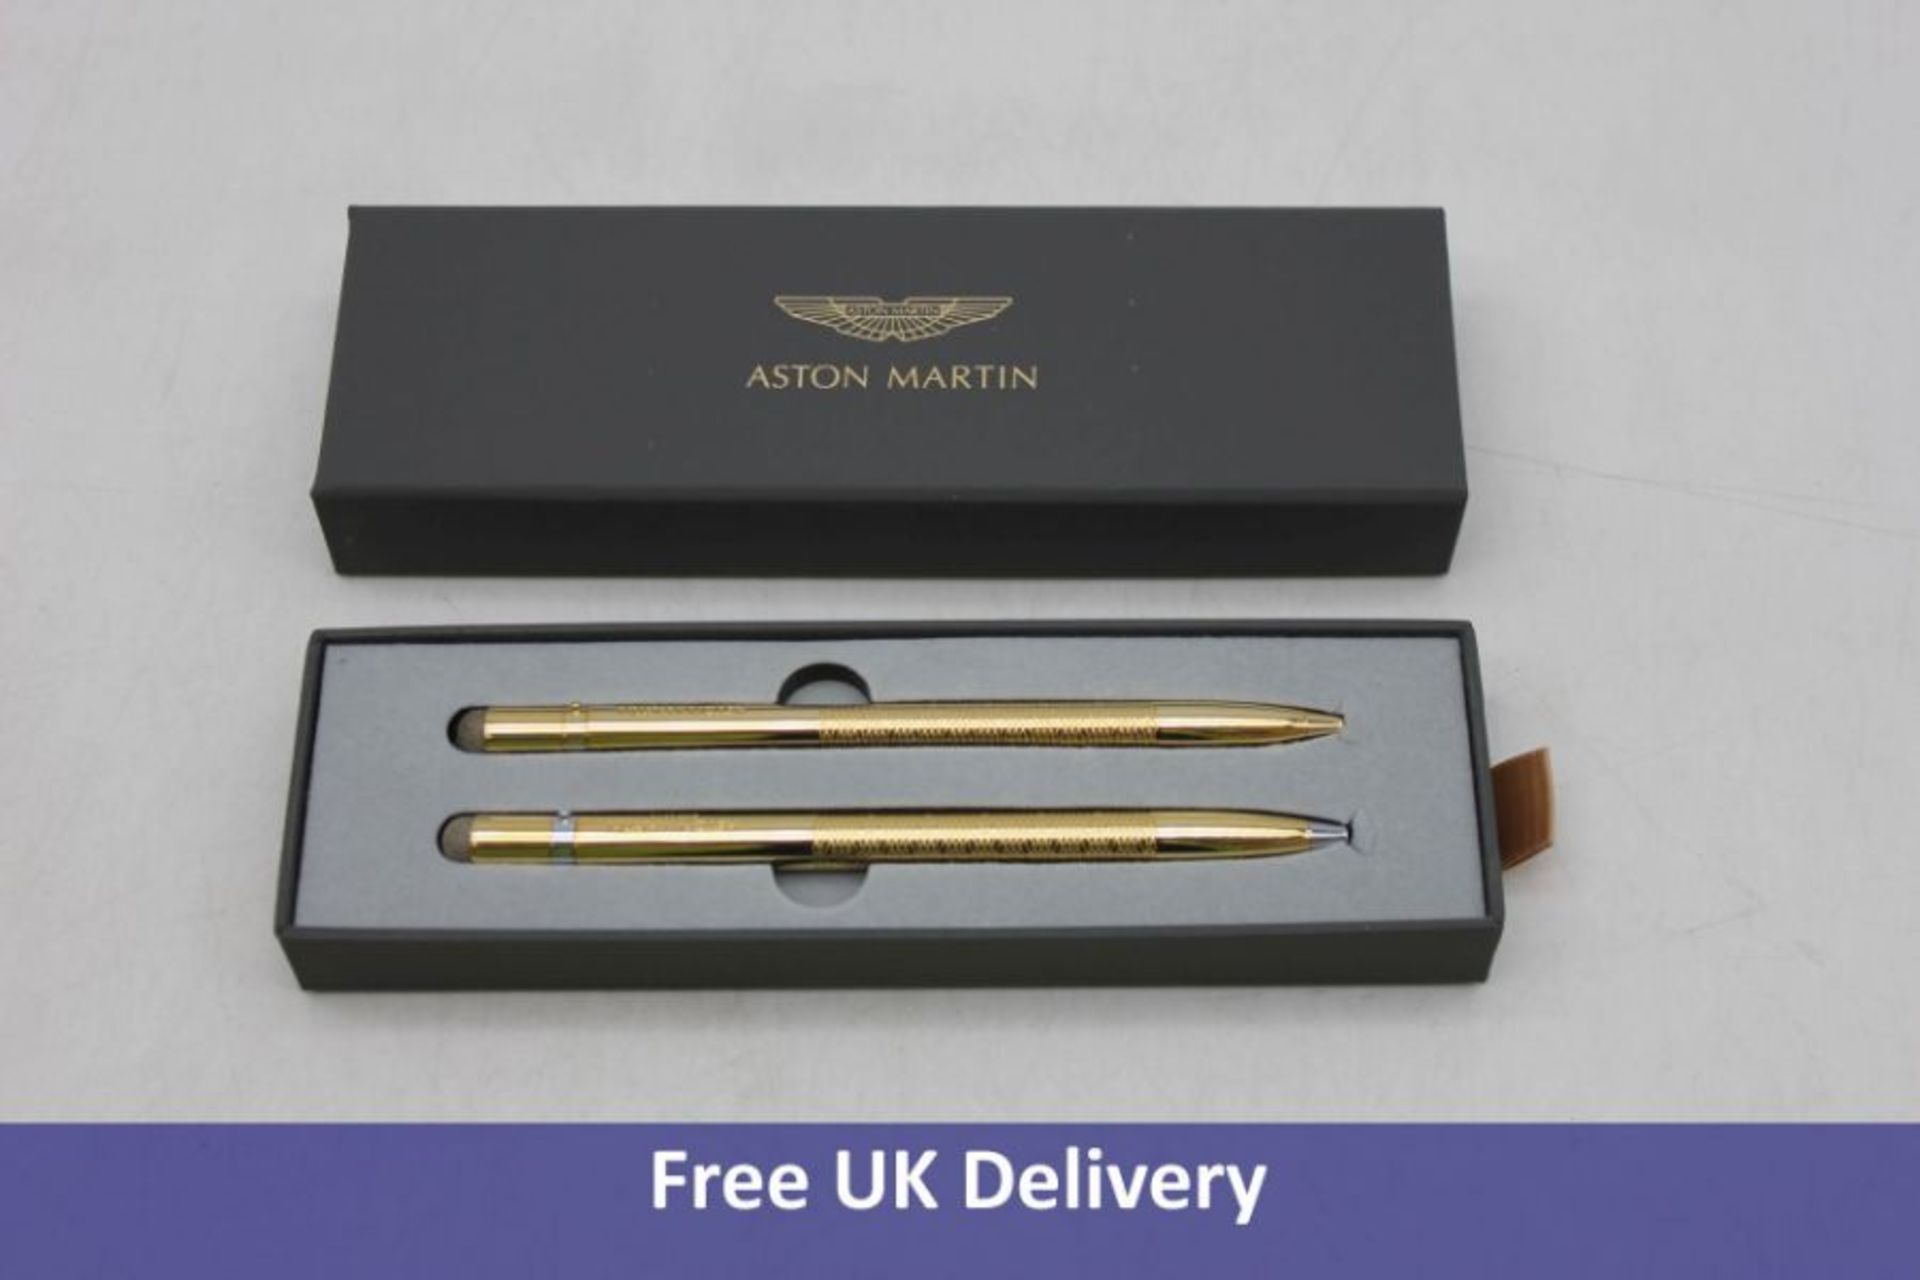 Five Aston Martin Stylus Ball Pen and Roller, Gold - Image 4 of 5